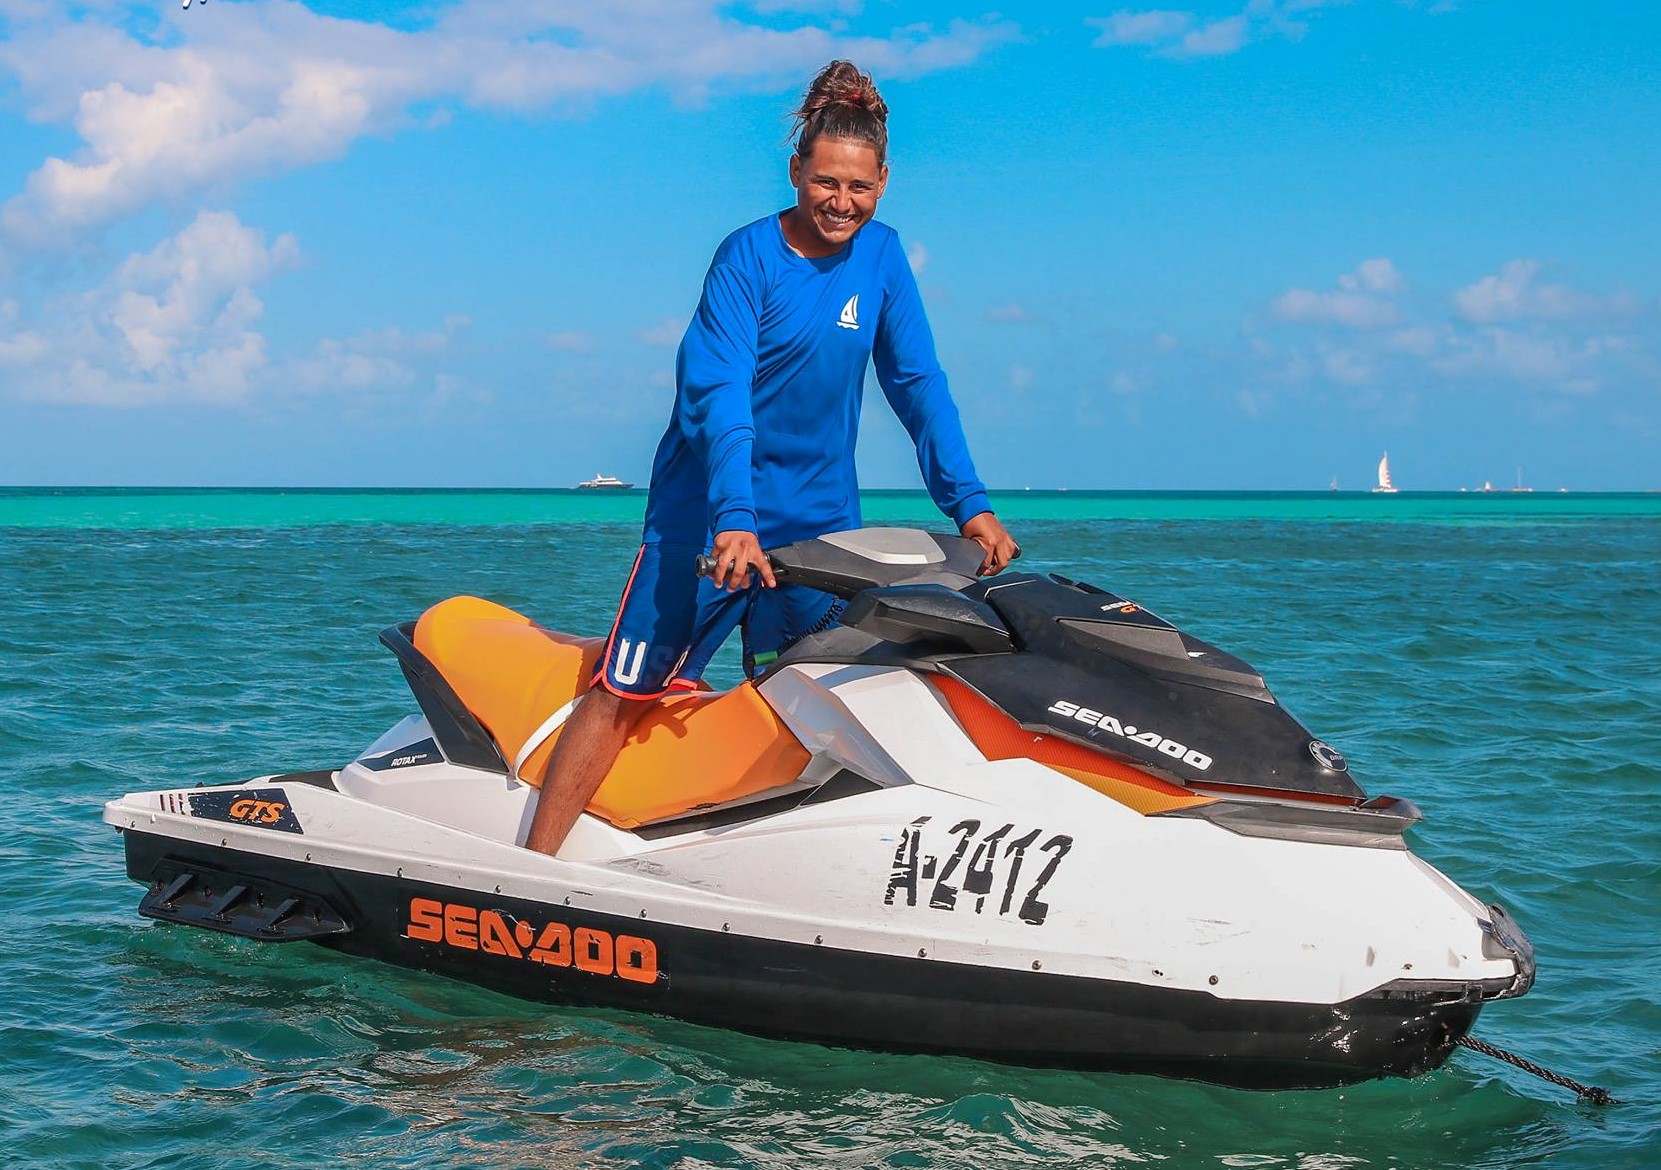 WAVERUNNERS EXCITEMENT BY AWC Aruba - Vacationstore.net